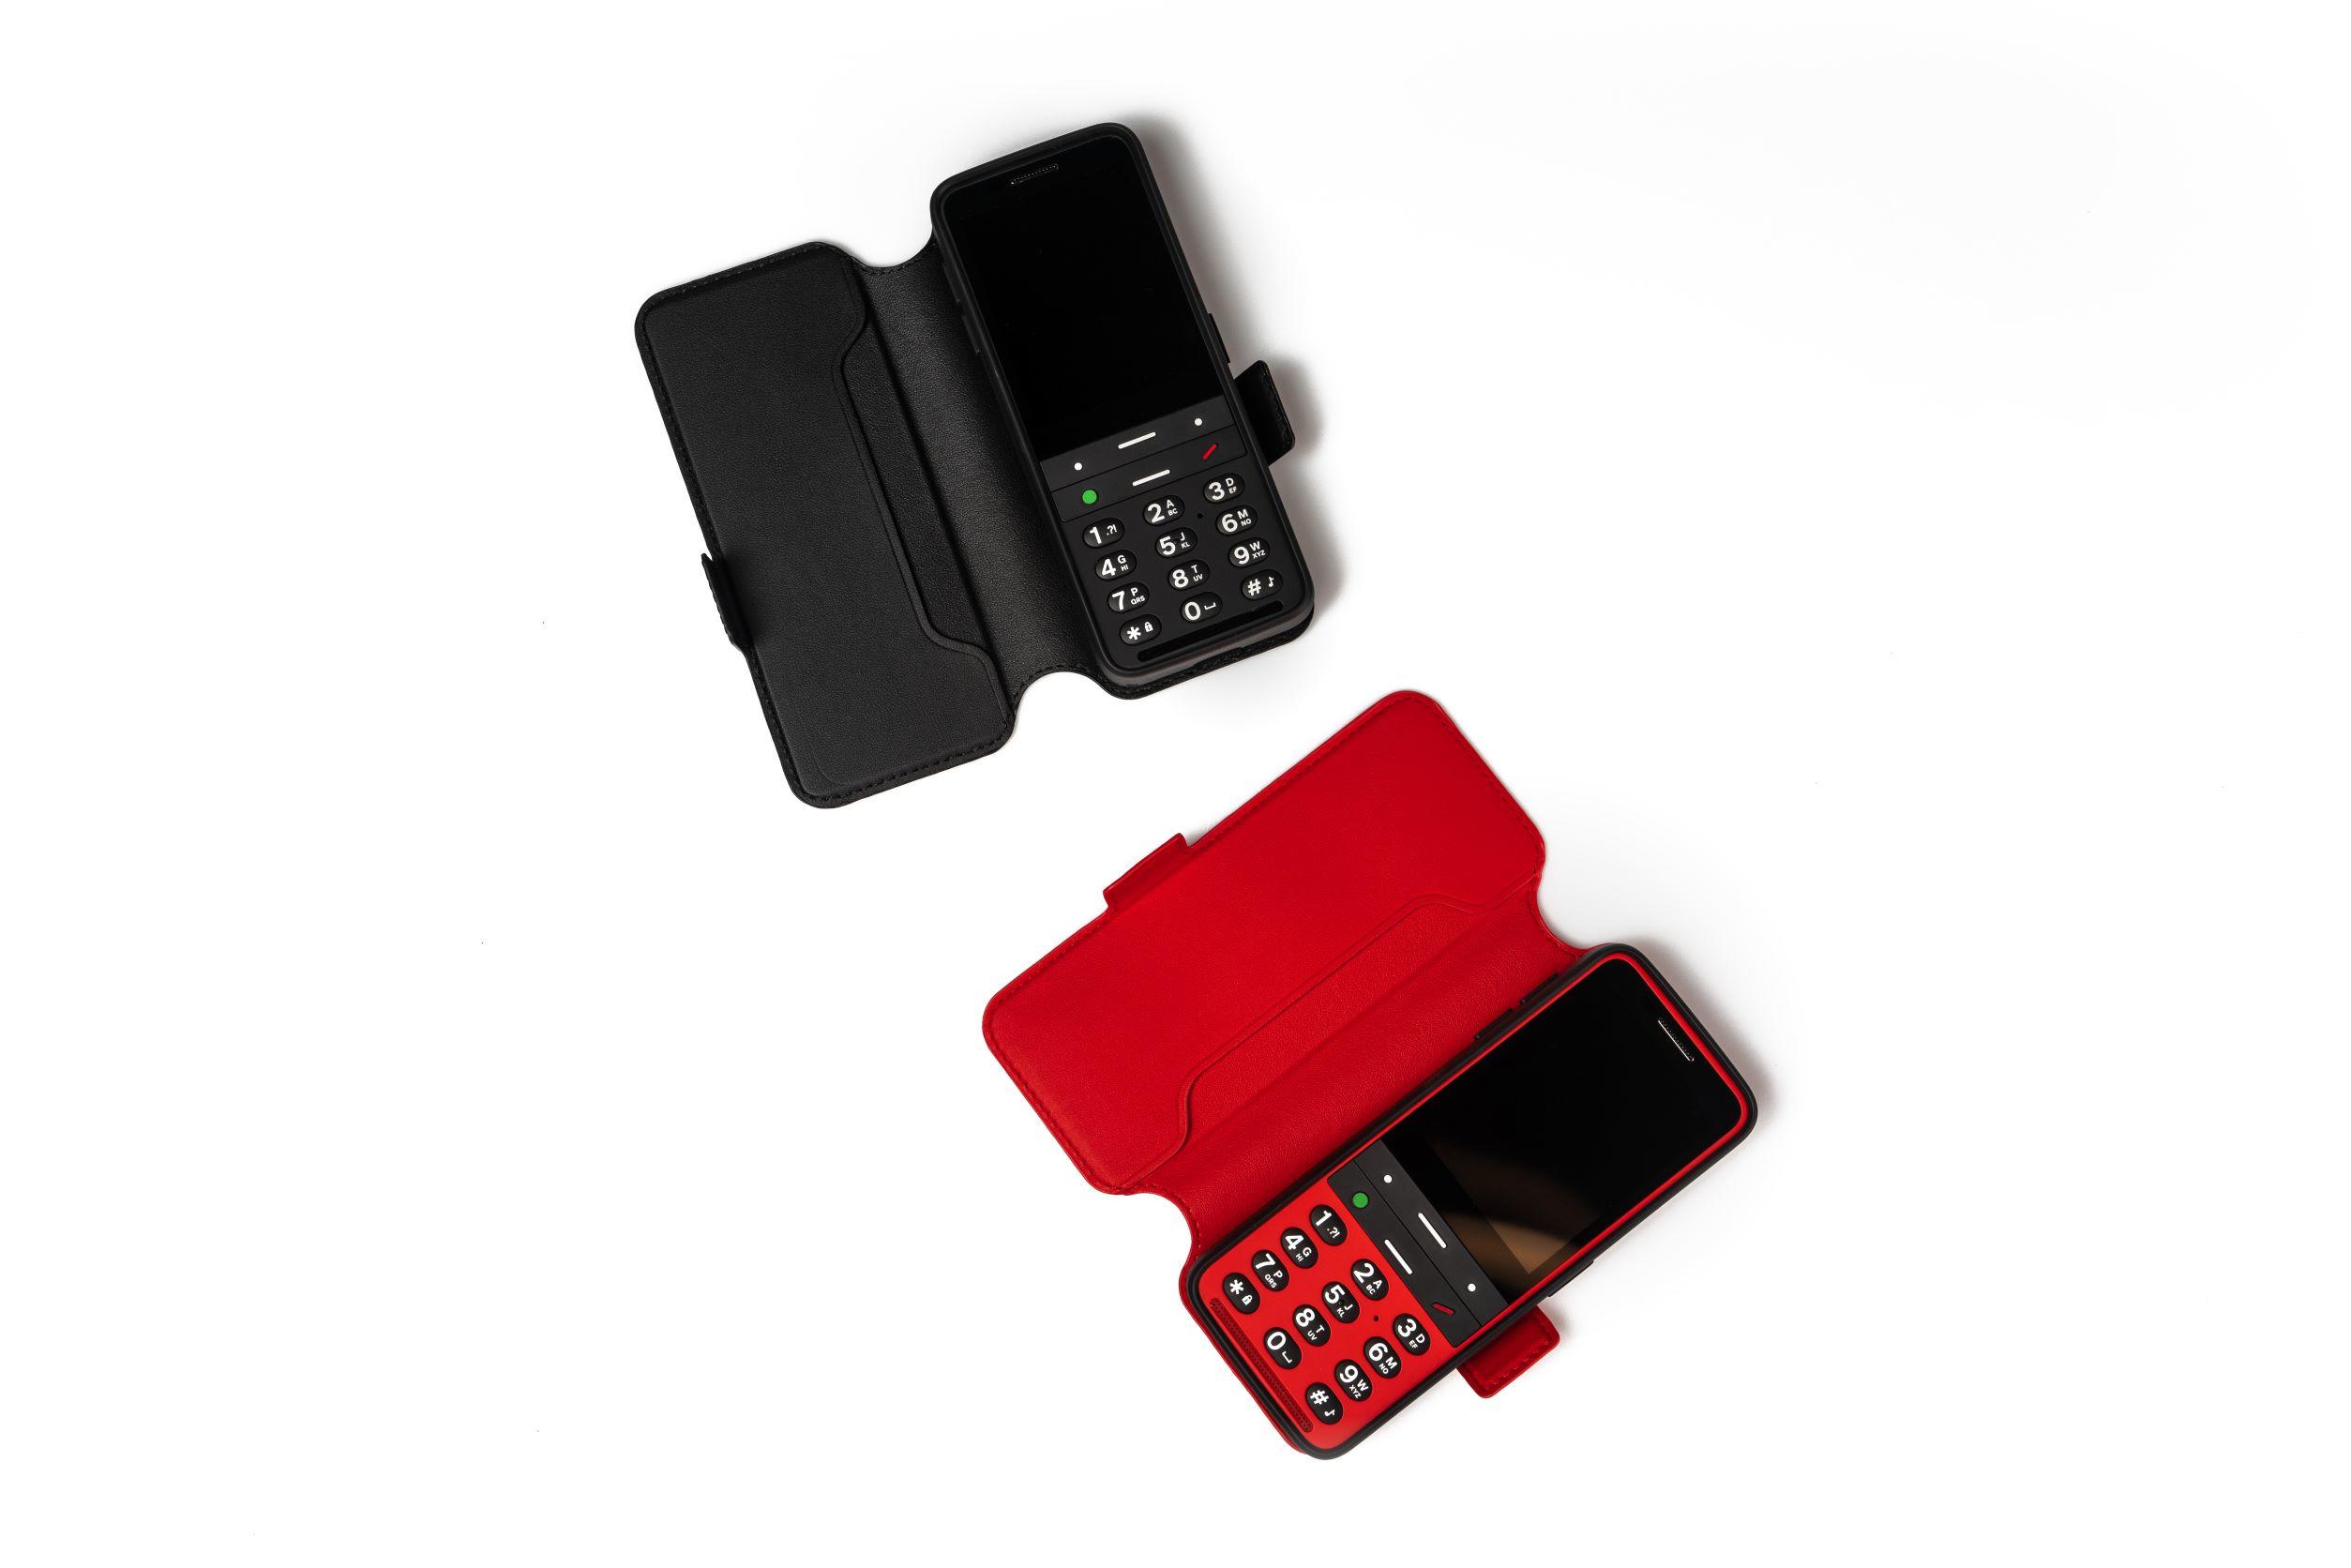 2 Blindshell Classic 2 phones one red on black both with a matching colour flip case open